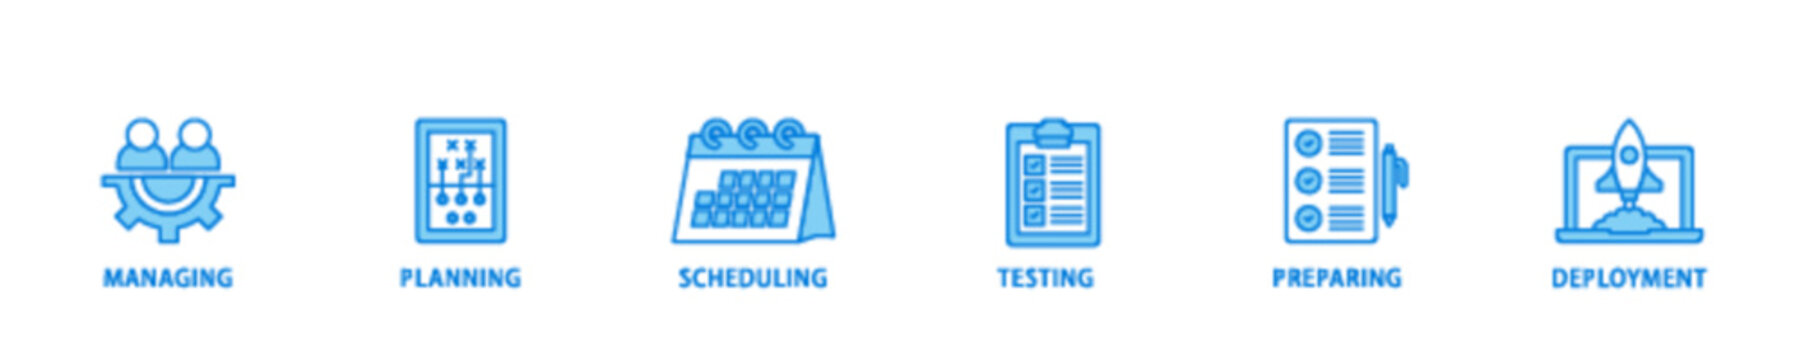 Release management icon set flow process illustrationwhich consists of managing, planning, scheduling, building, testing, preparing and deployment icon live stroke and easy to edit 